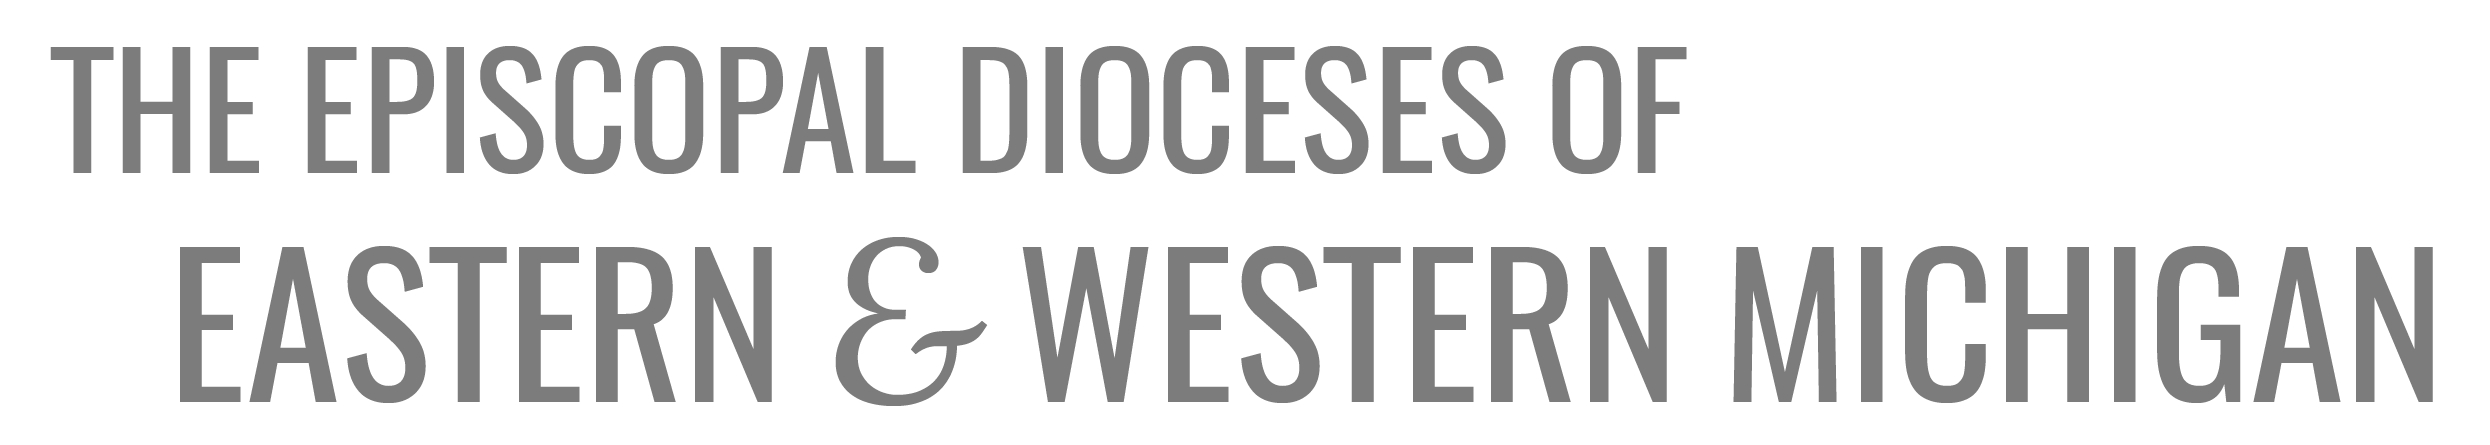 The Episcopal Dioceses of Eastern & Western Michigan